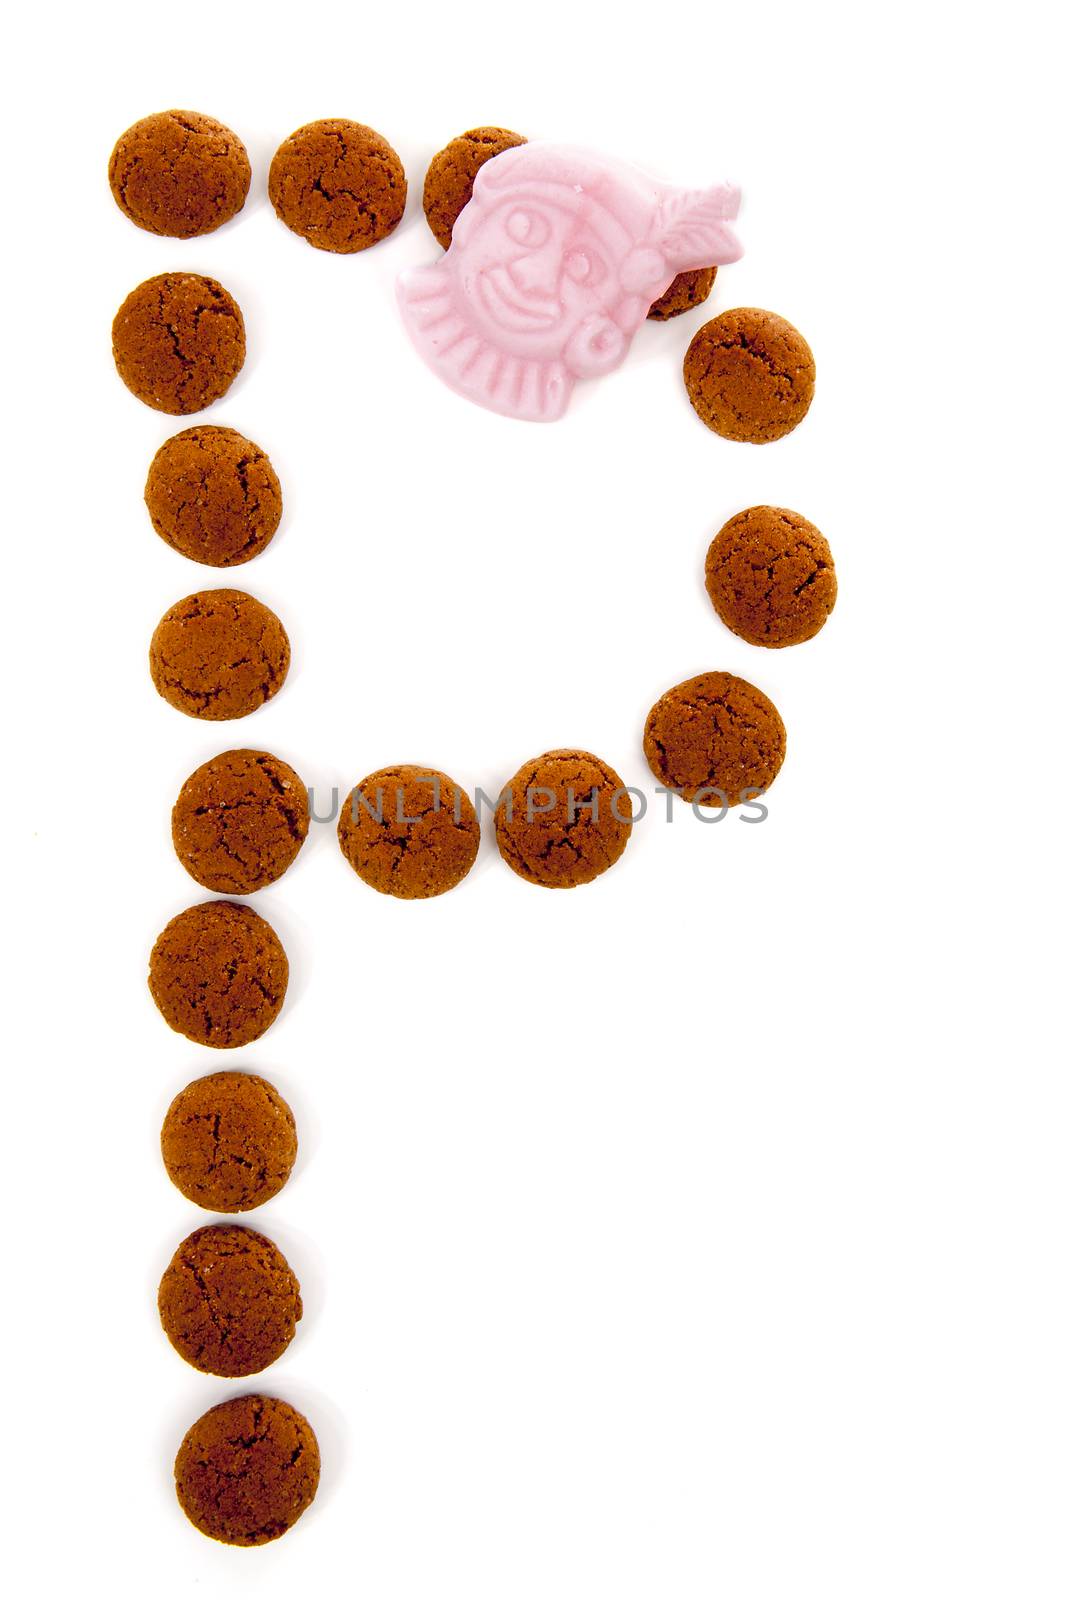 Ginger nuts, pepernoten, in the shape of letter P isolated on white background. Typical Dutch candy for Sinterklaas event in december